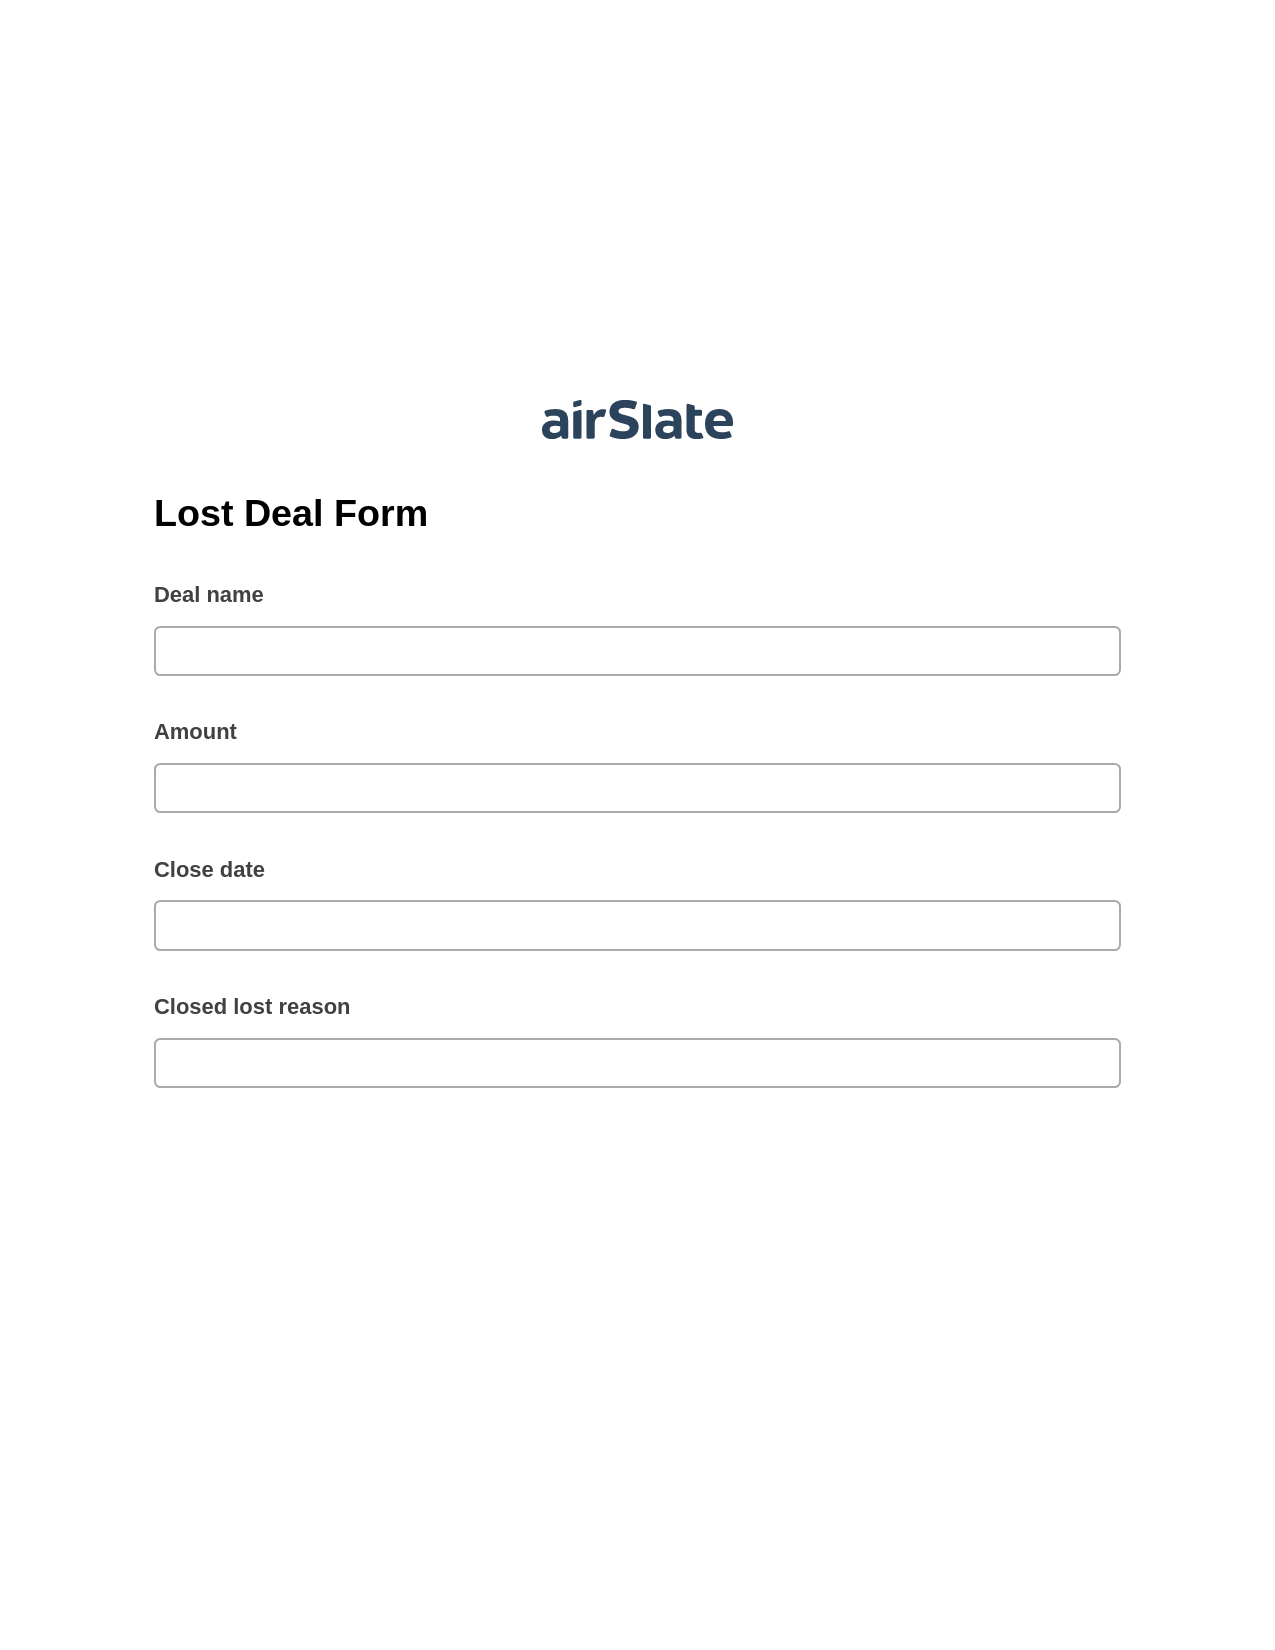 Lost Deal Form Pre-fill from Google Sheets Bot, Webhook Bot, Archive to Box Bot